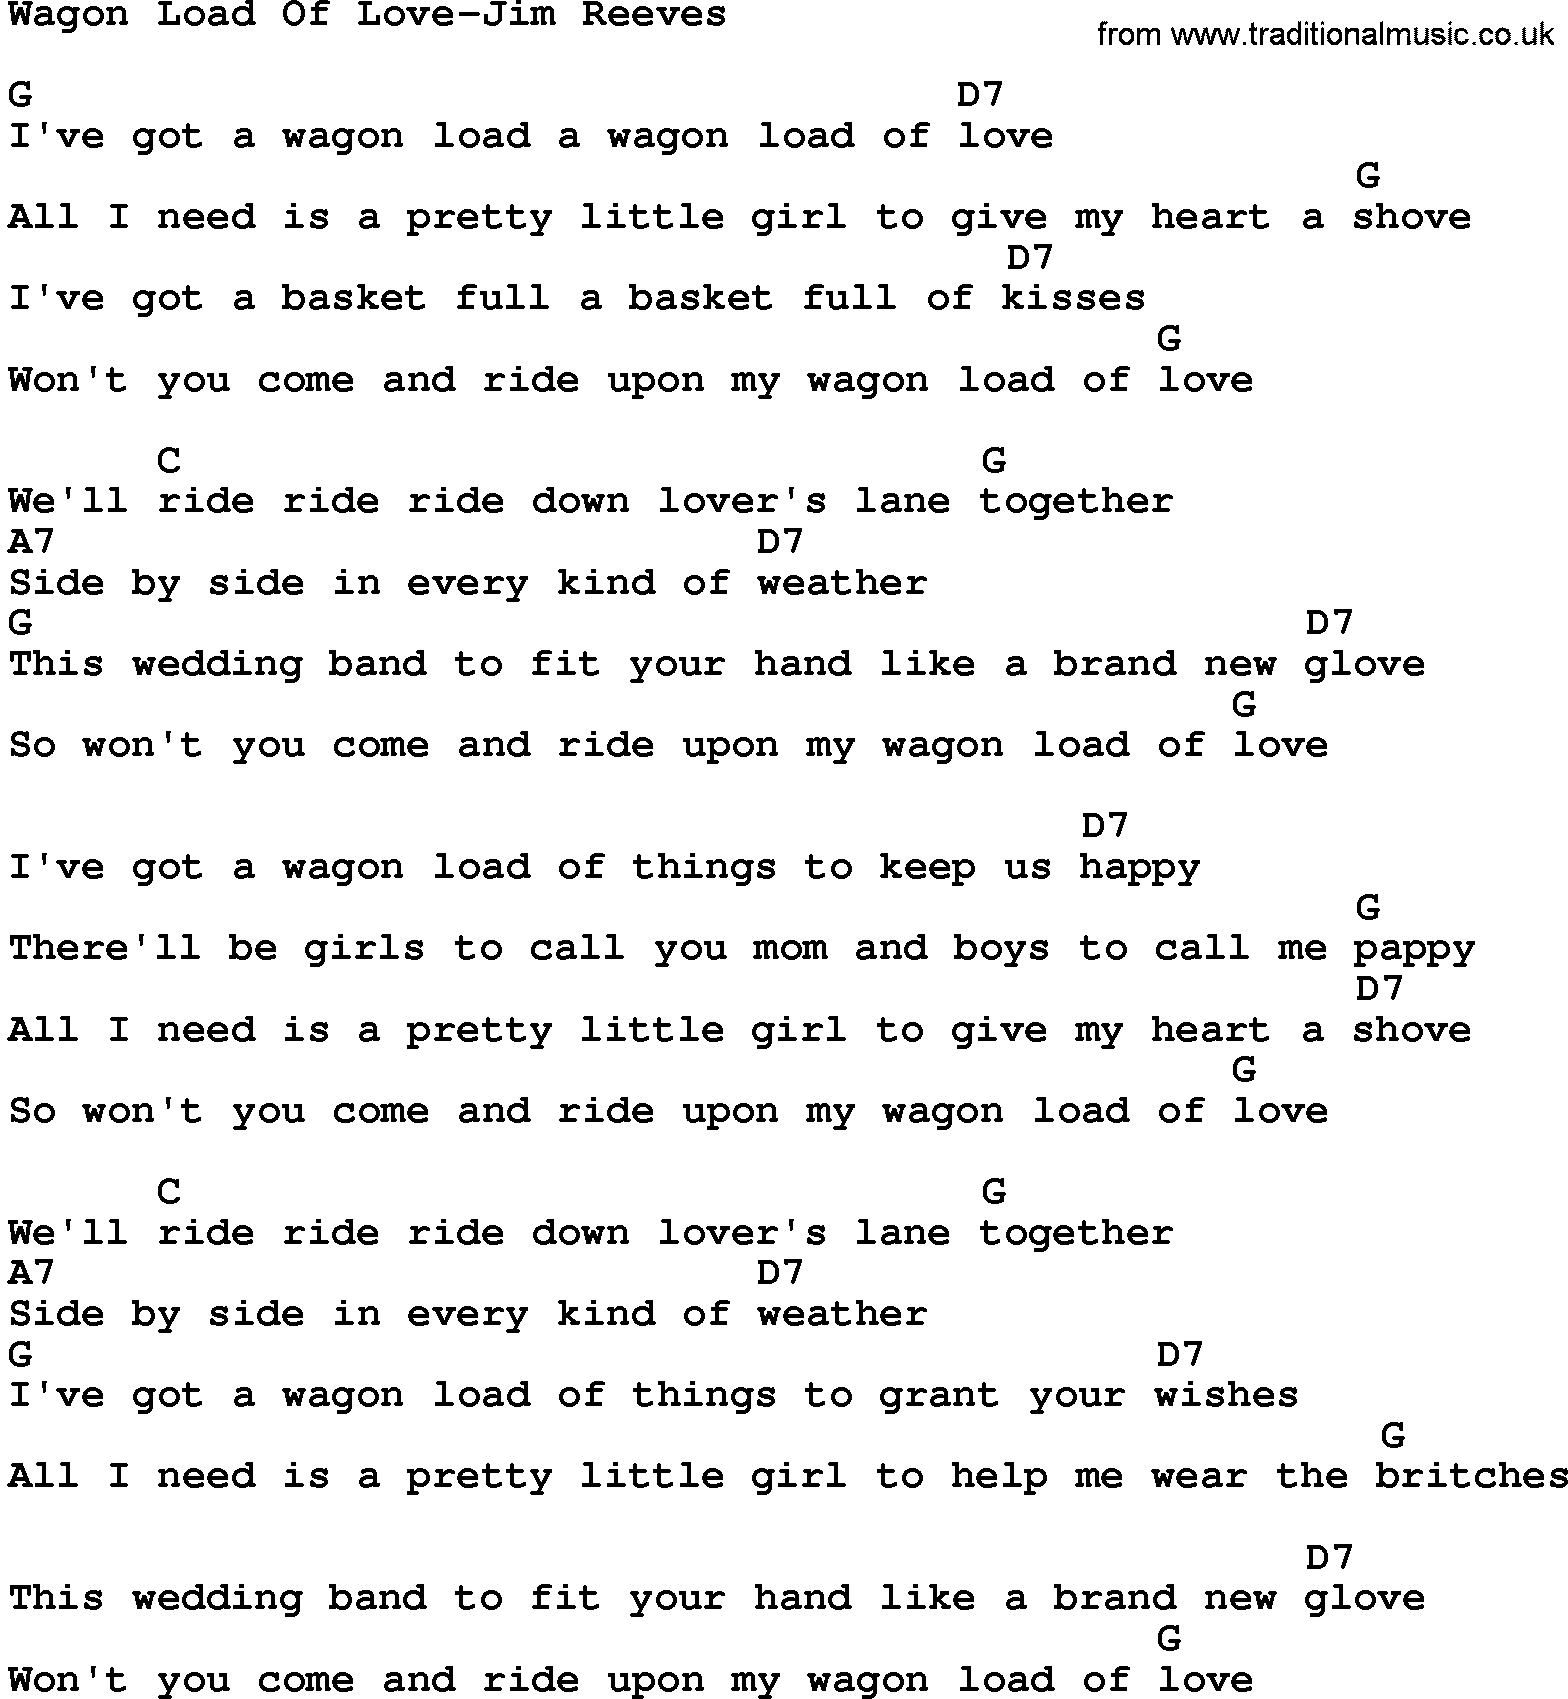 Country music song: Wagon Load Of Love-Jim Reeves lyrics and chords